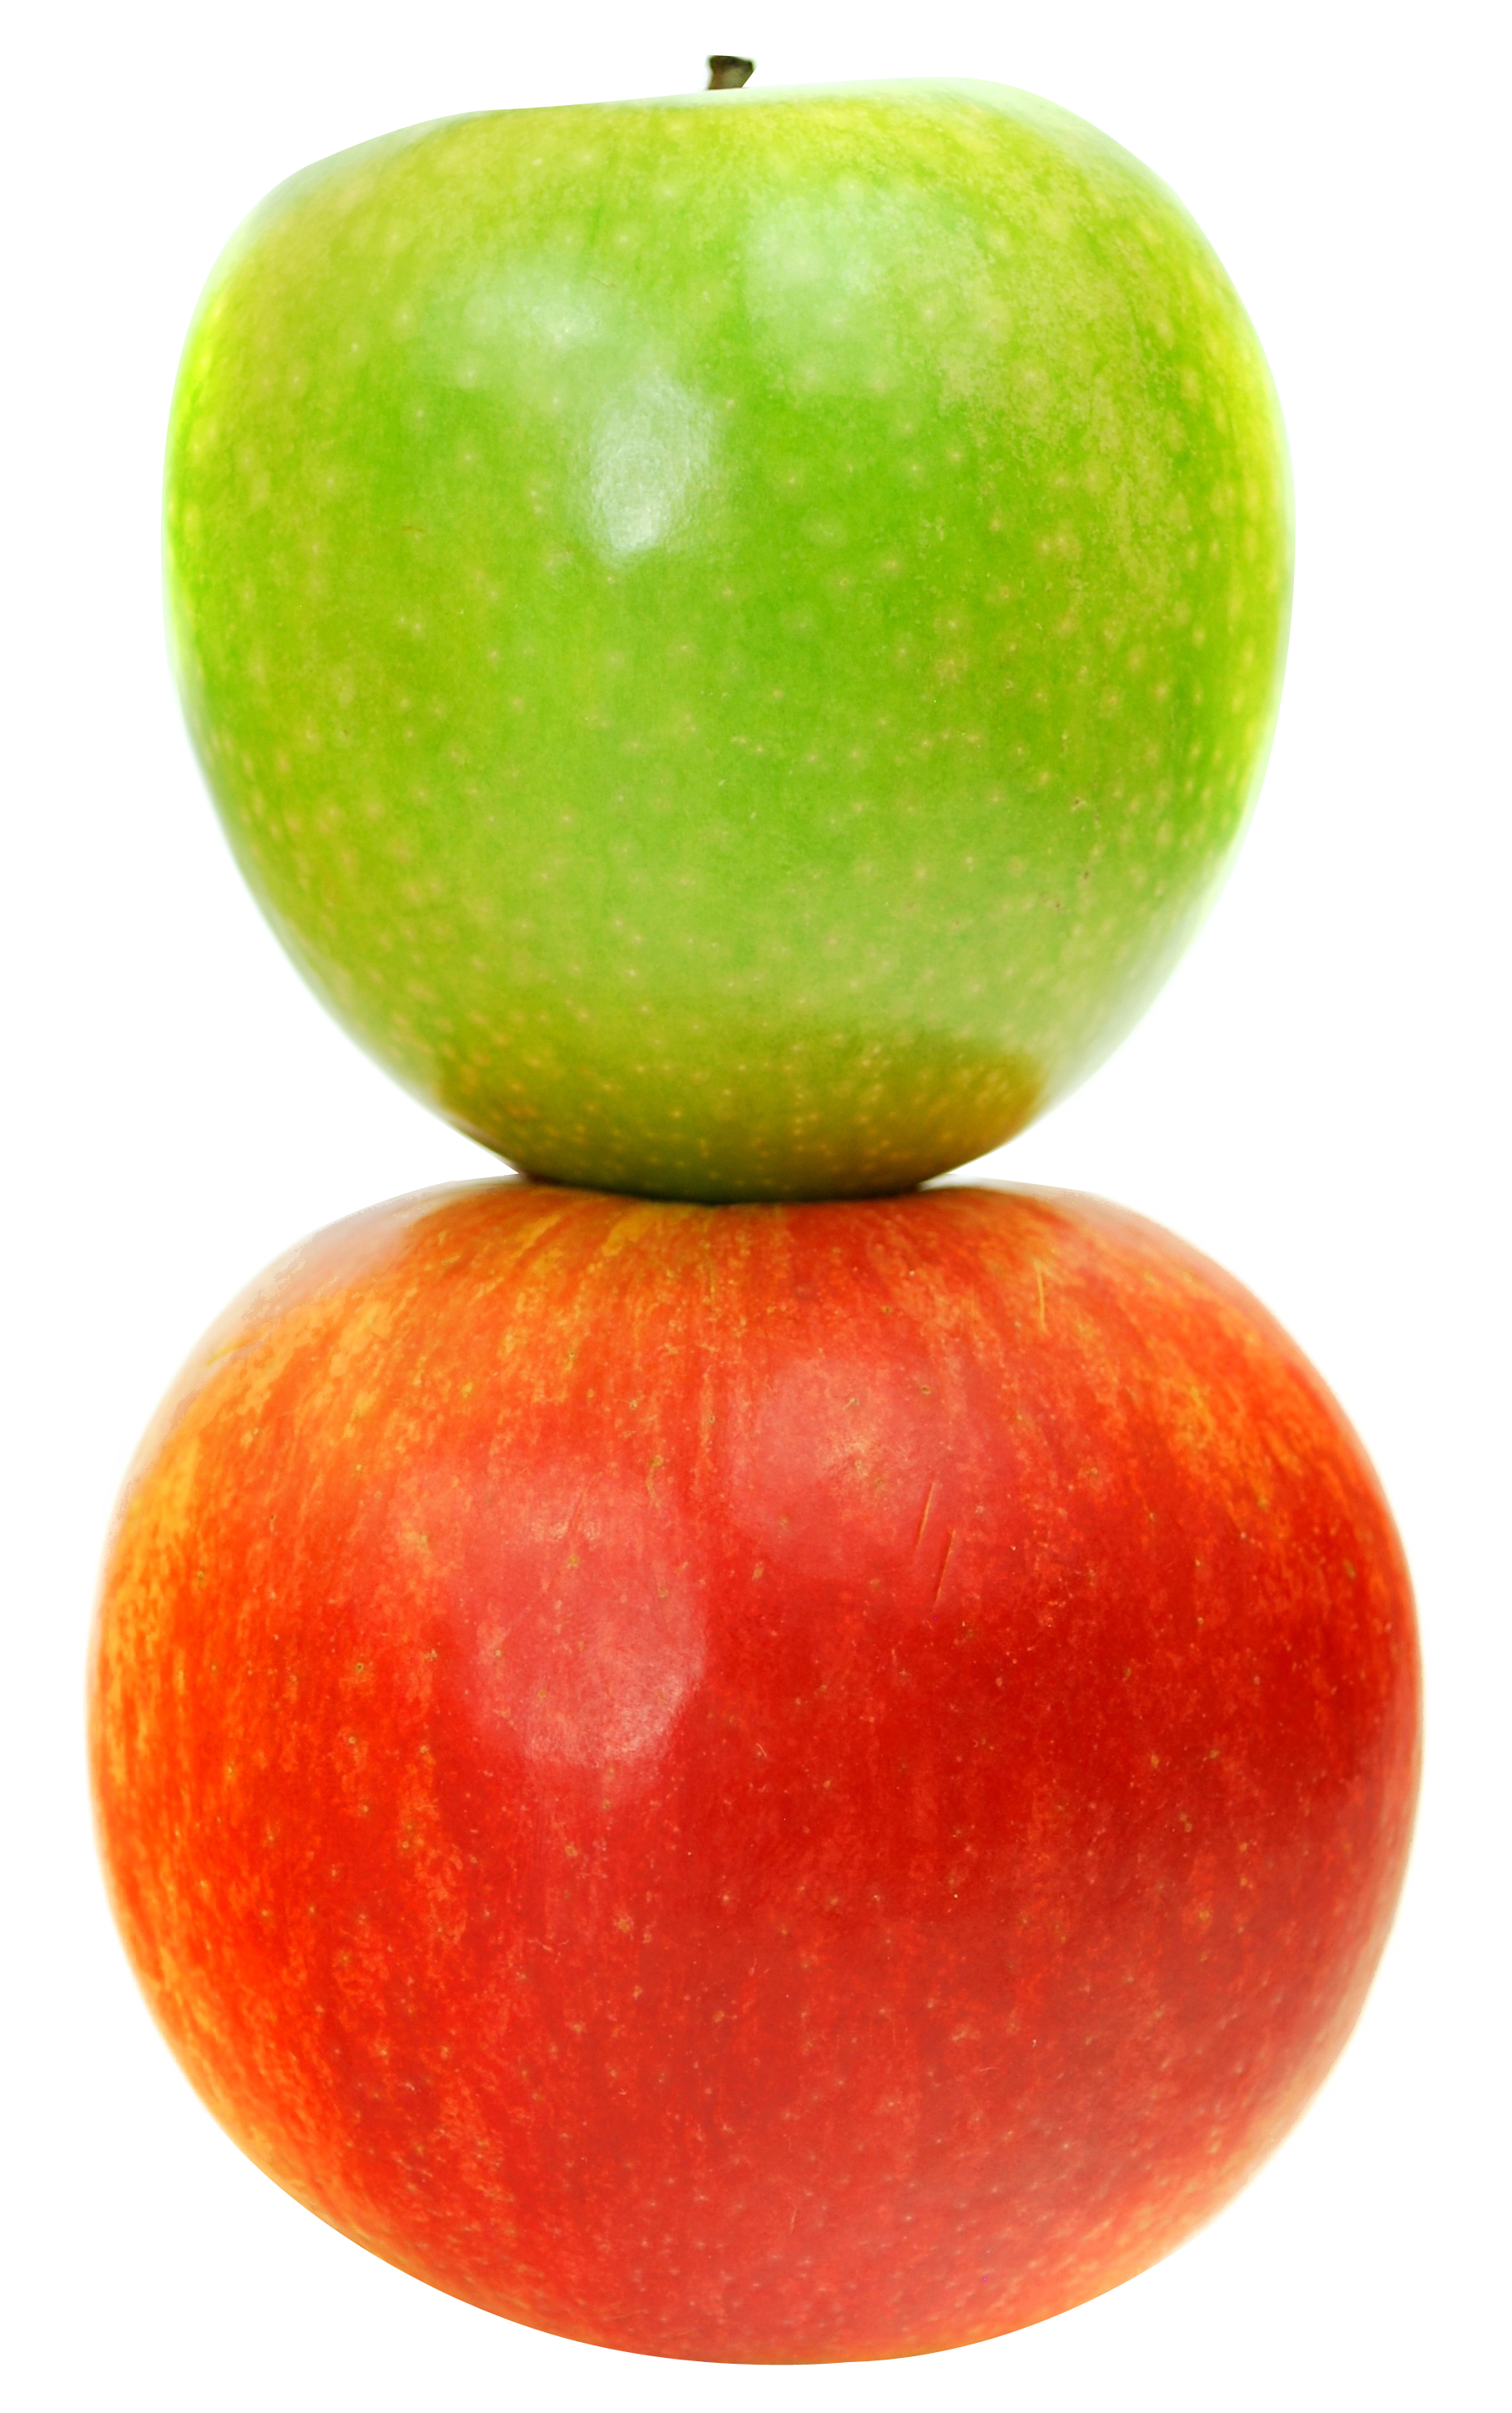 Double Apple PNG Image